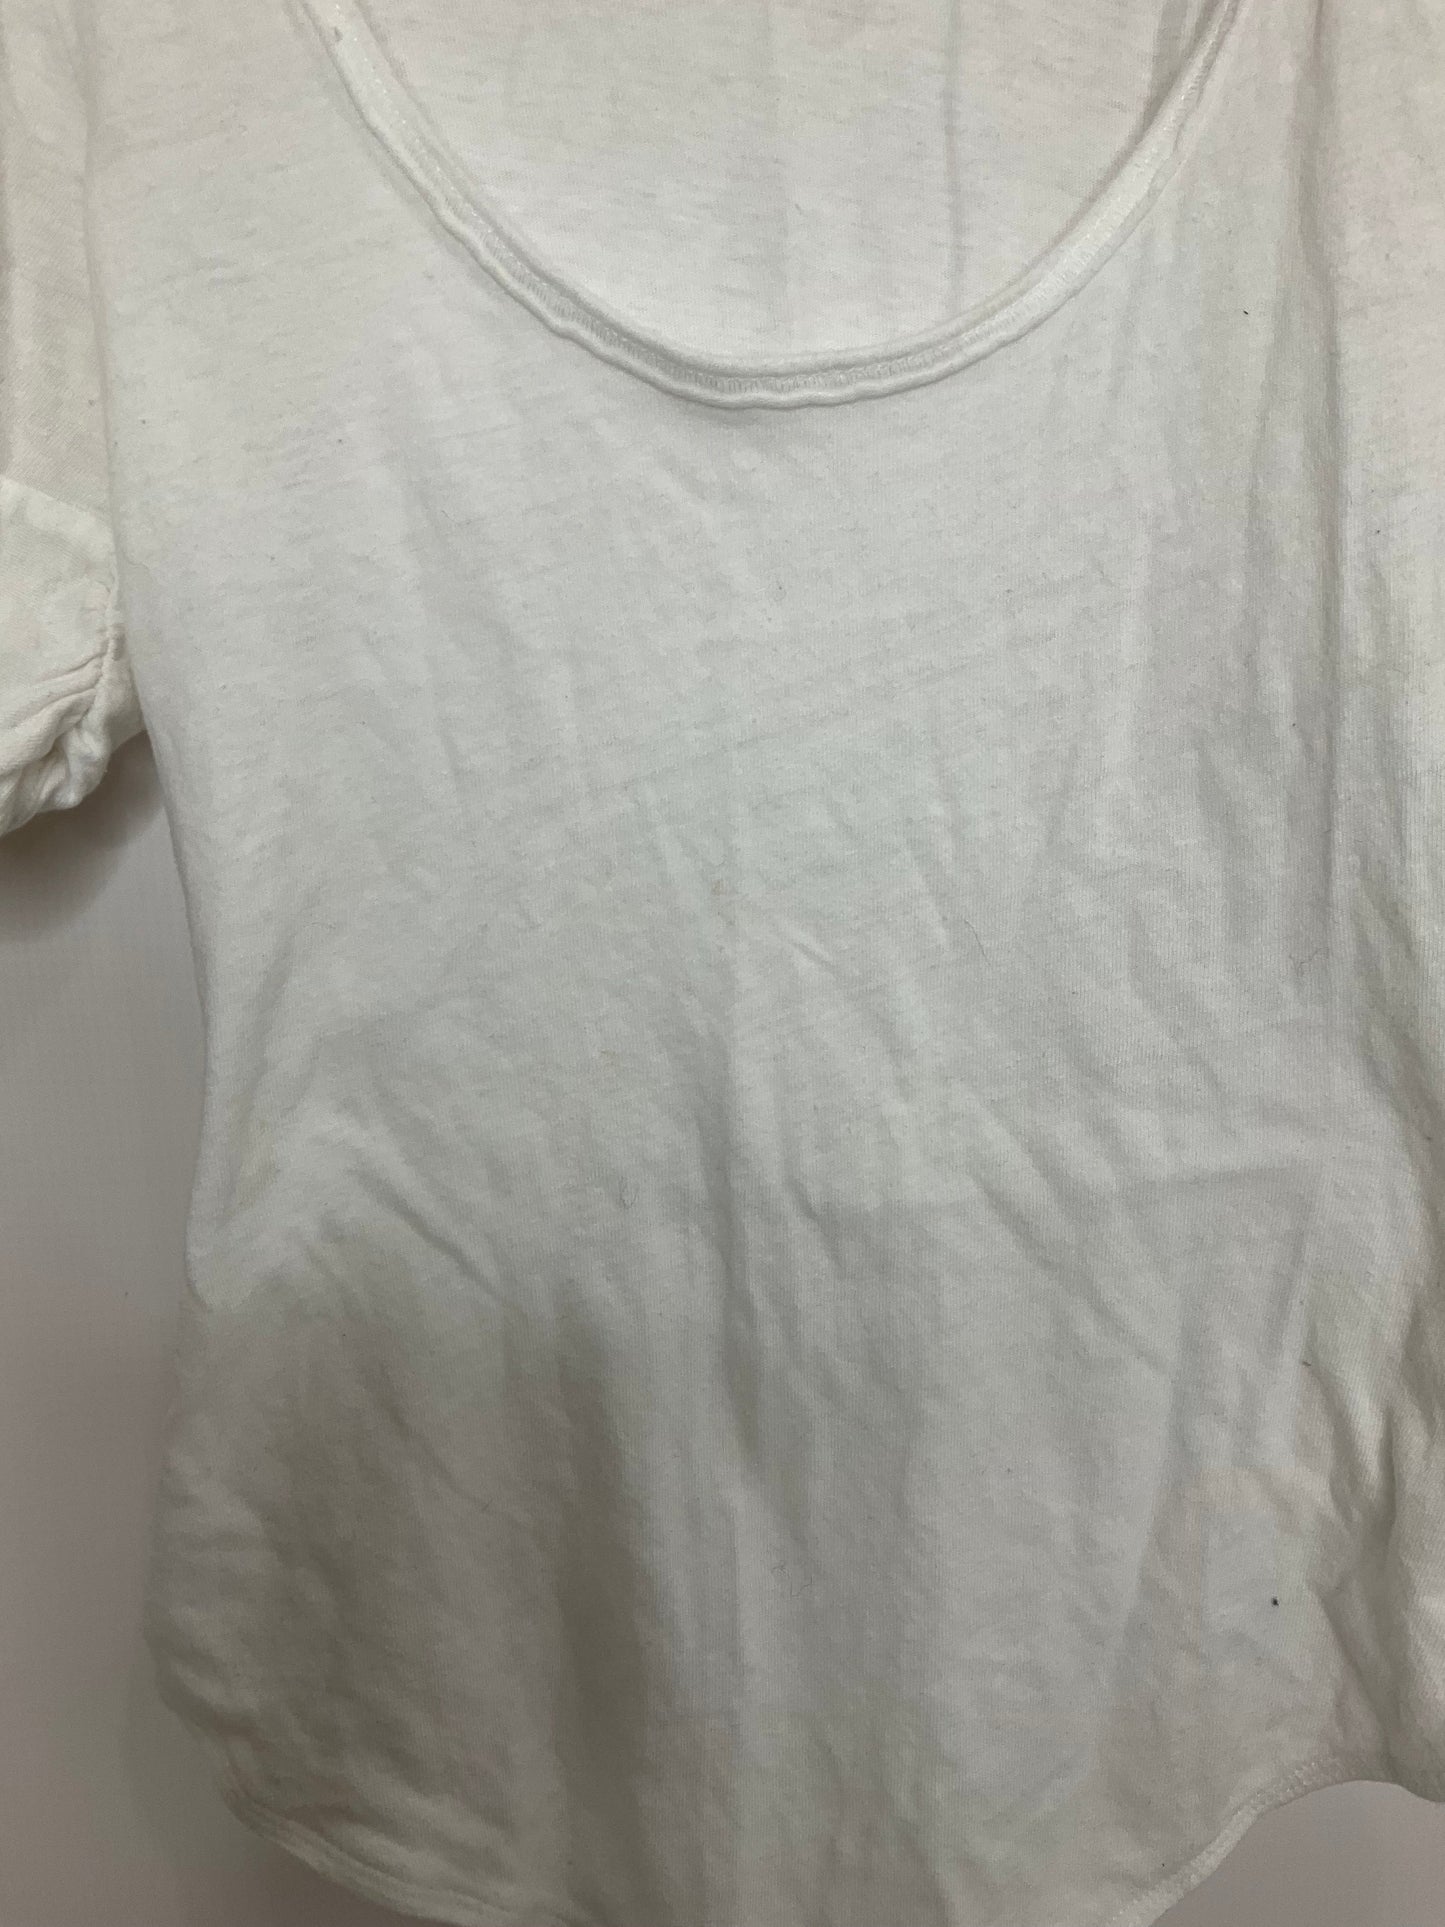 White Top Short Sleeve Free People, Size Xs